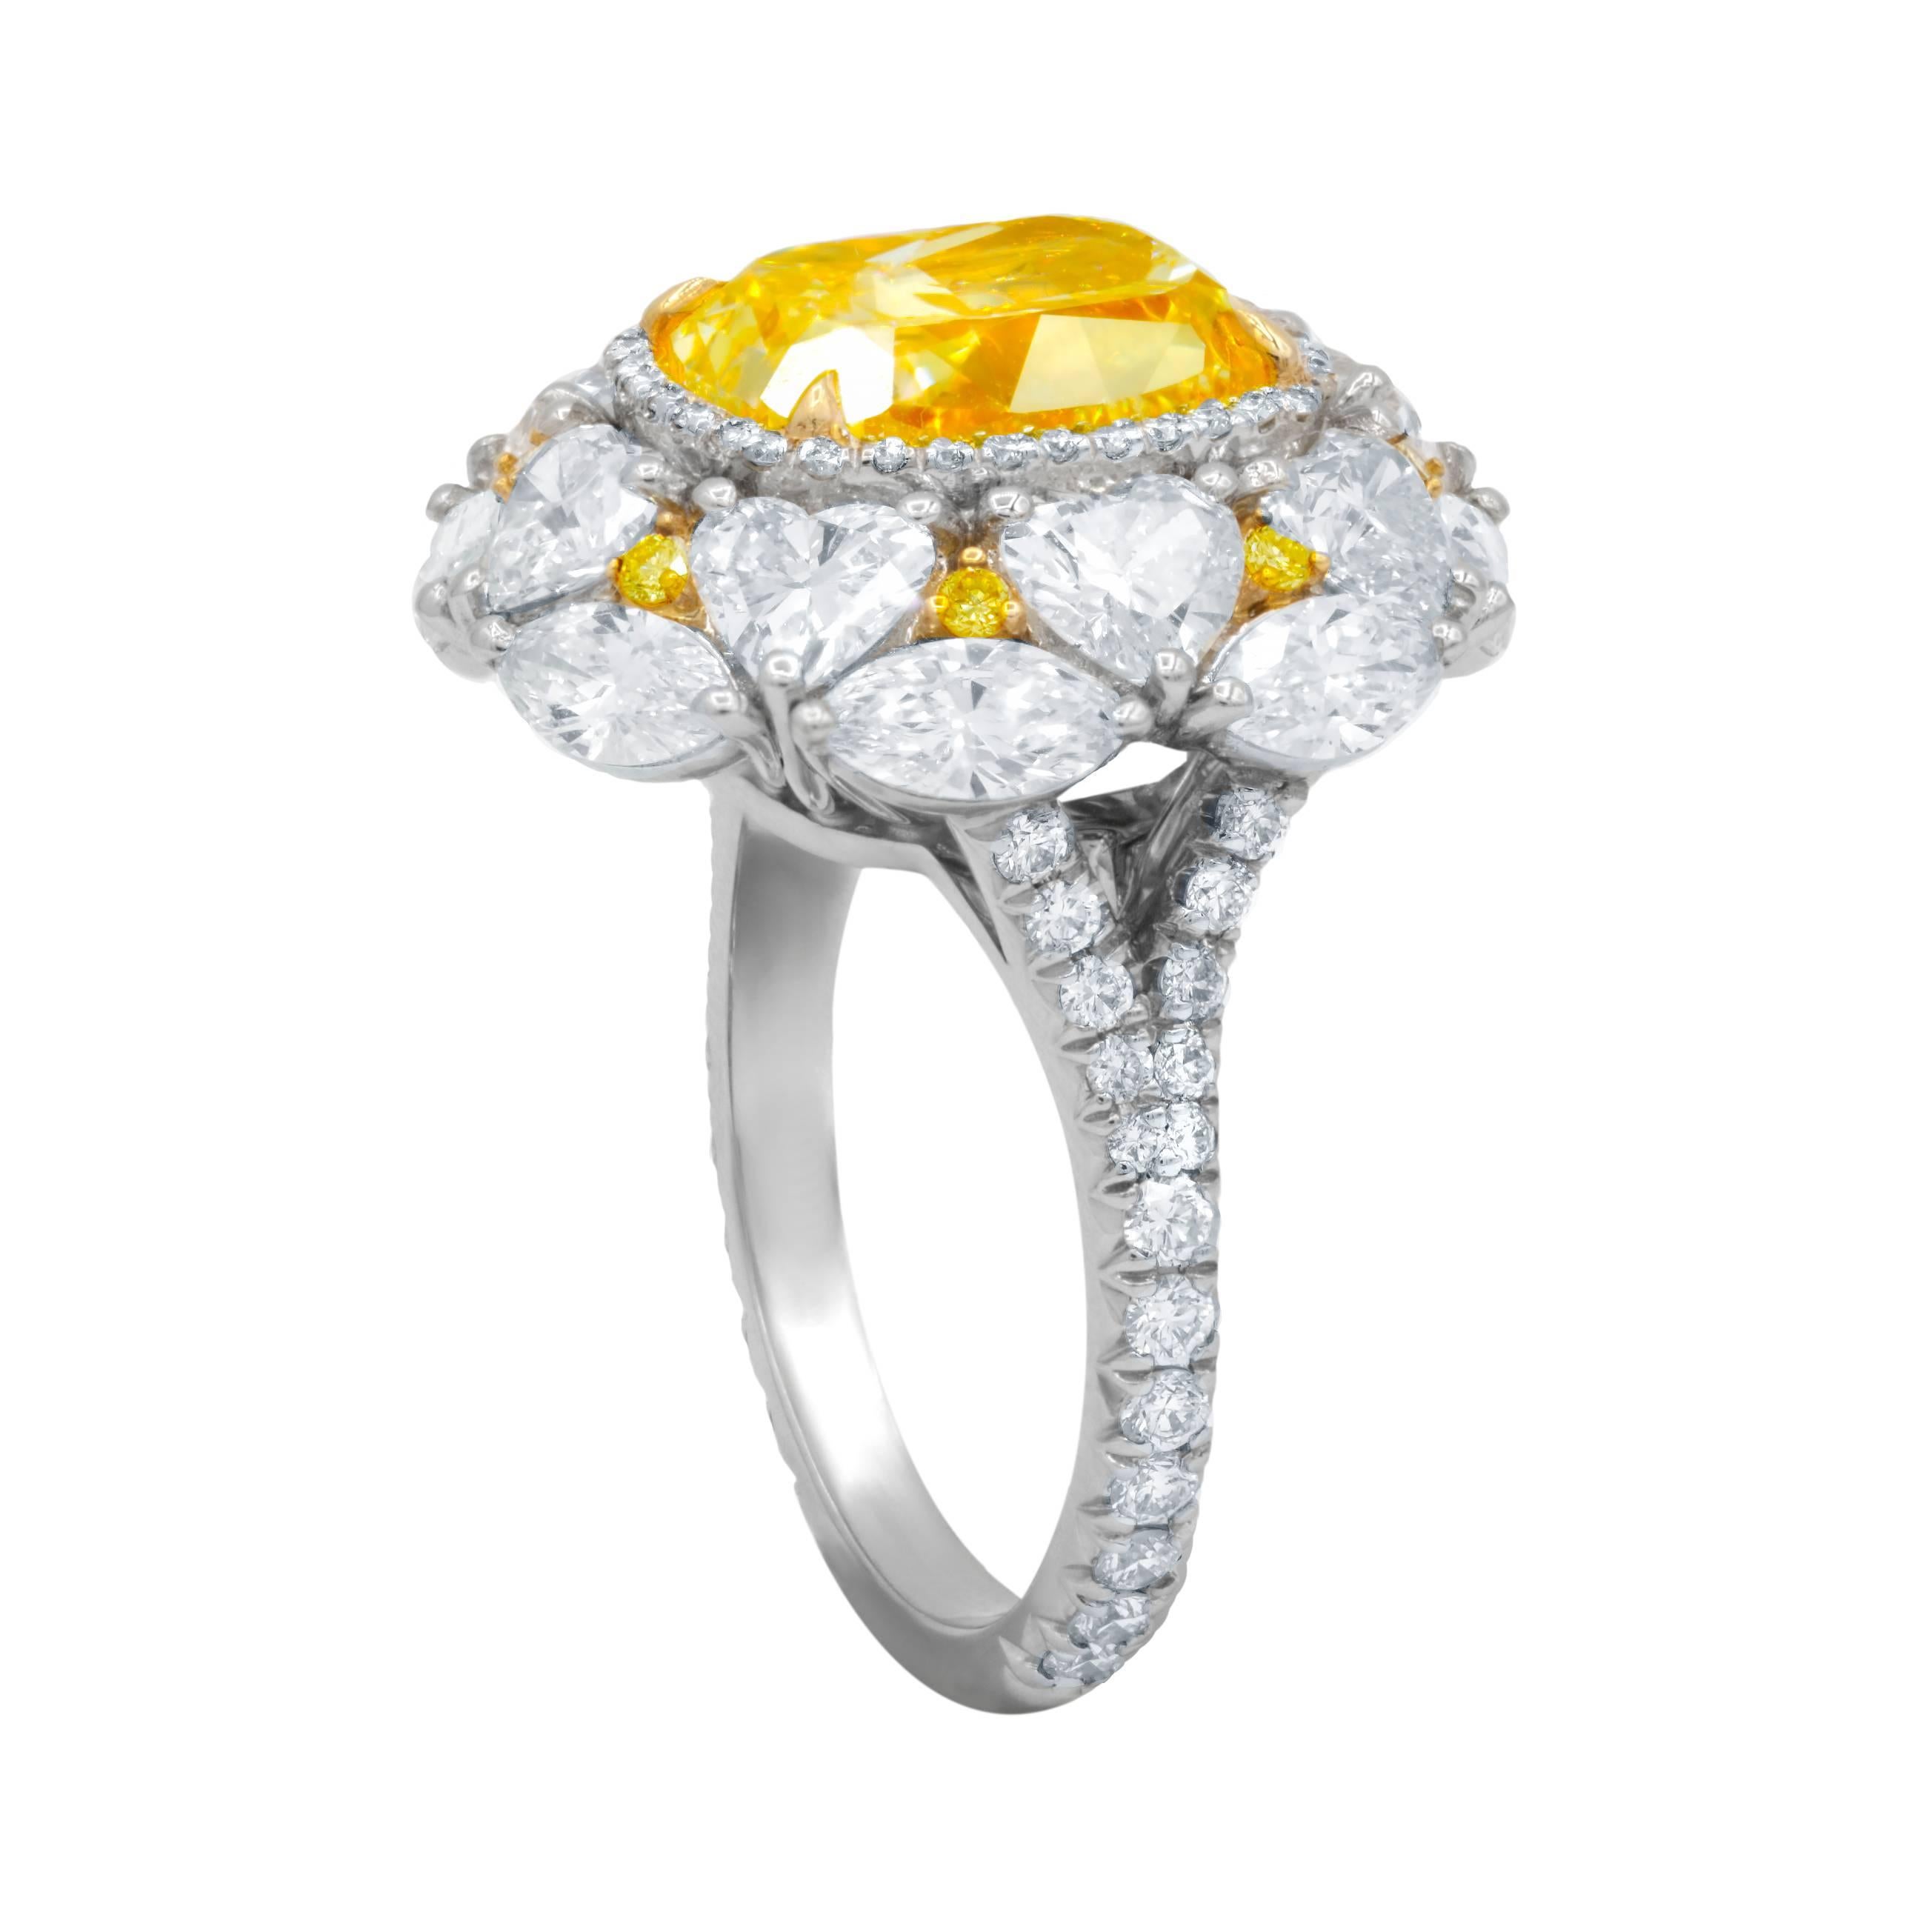 Exclusively designed Fancy Yellow (Canary) Diamond Ring.
The Center Diamond is 5.01 Carat Fancy Light Yellow, VS2 in Clarity, certified by GIA Laboratory, surrounded by 5.00 Carats of diamonds on the side. 8 Heart Shape Diamonds, each approximately